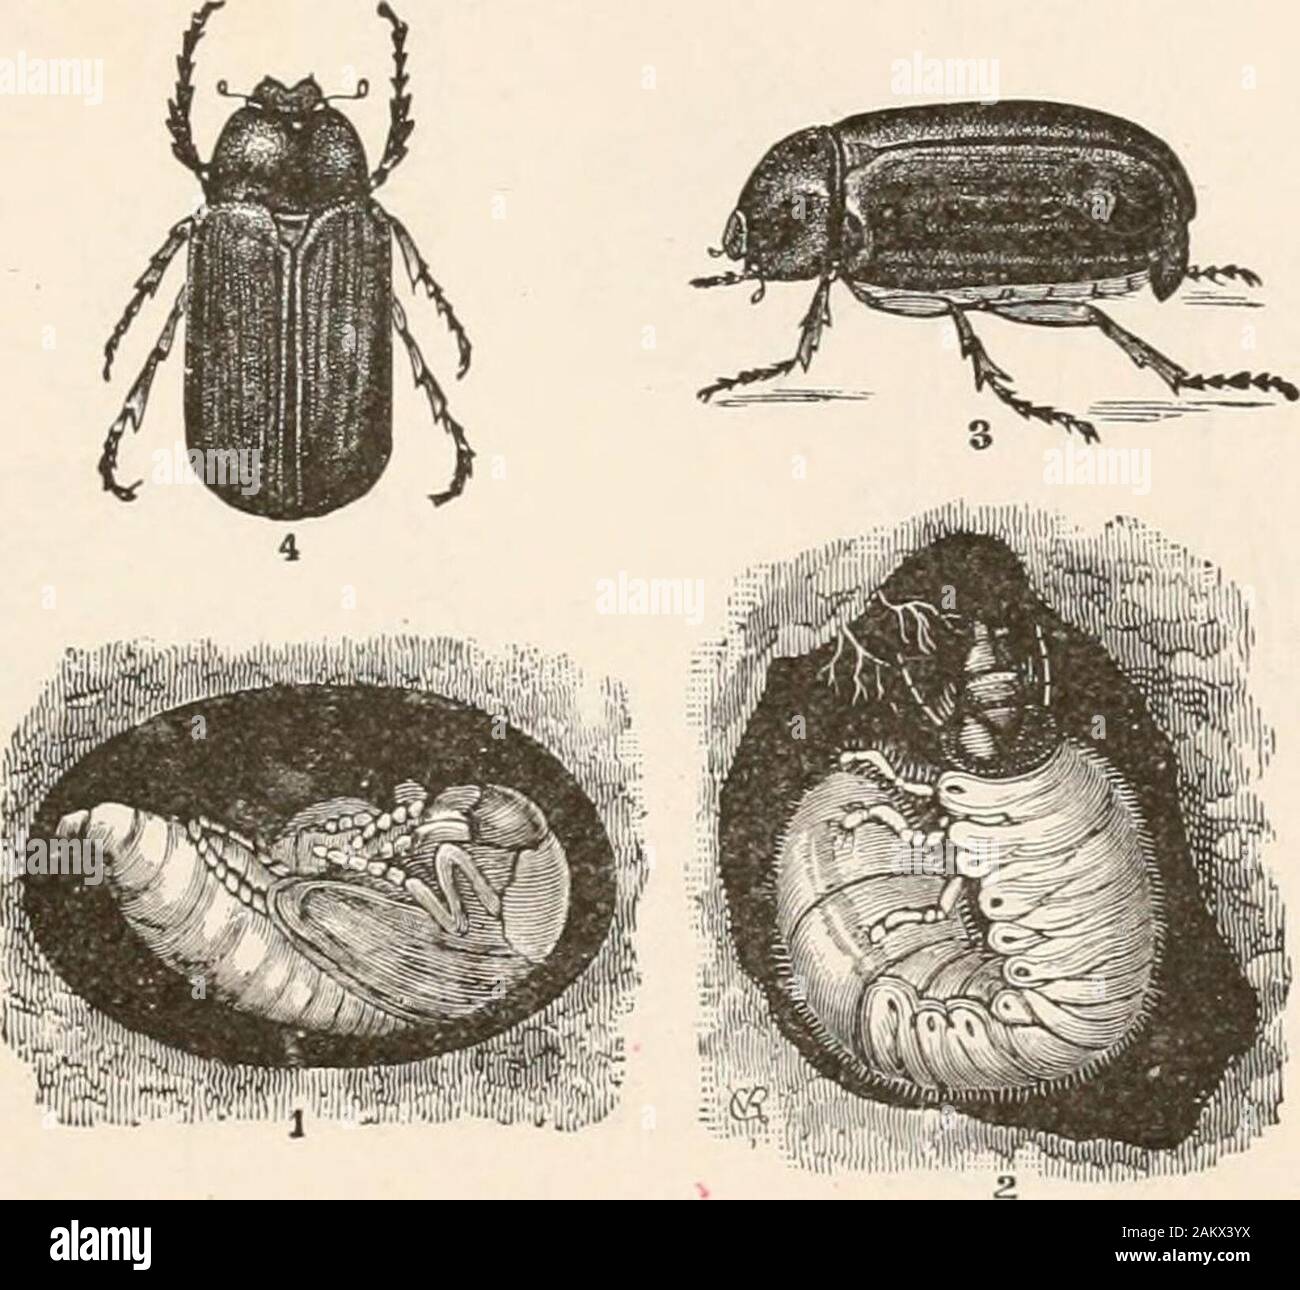 Entomology for beginners; for the use of young folks, fruitgrowers, farmers, and gardeners; . FIG. 107. — The lesser Pri-onus. Natural size.—AfterRiley. ORDER COLEOPTERA. 107 ceeded by the grape beetle, Pelidnota. punctata Linn., and the Gold-smith beetle, Cotalpa lanigera Linn. The May-beetle, or dor-bug, is a. FIG. 108.—Metamorphosis of the May-beetle. 2, grub or larva; 1, pupa ; 3, 4,beetle. Natural size.—After Riley. very common species; its larva devours the roots of grass, sometimesinjuring lawns, also the roots of seedling trees in plantations. Allied Stock Photo